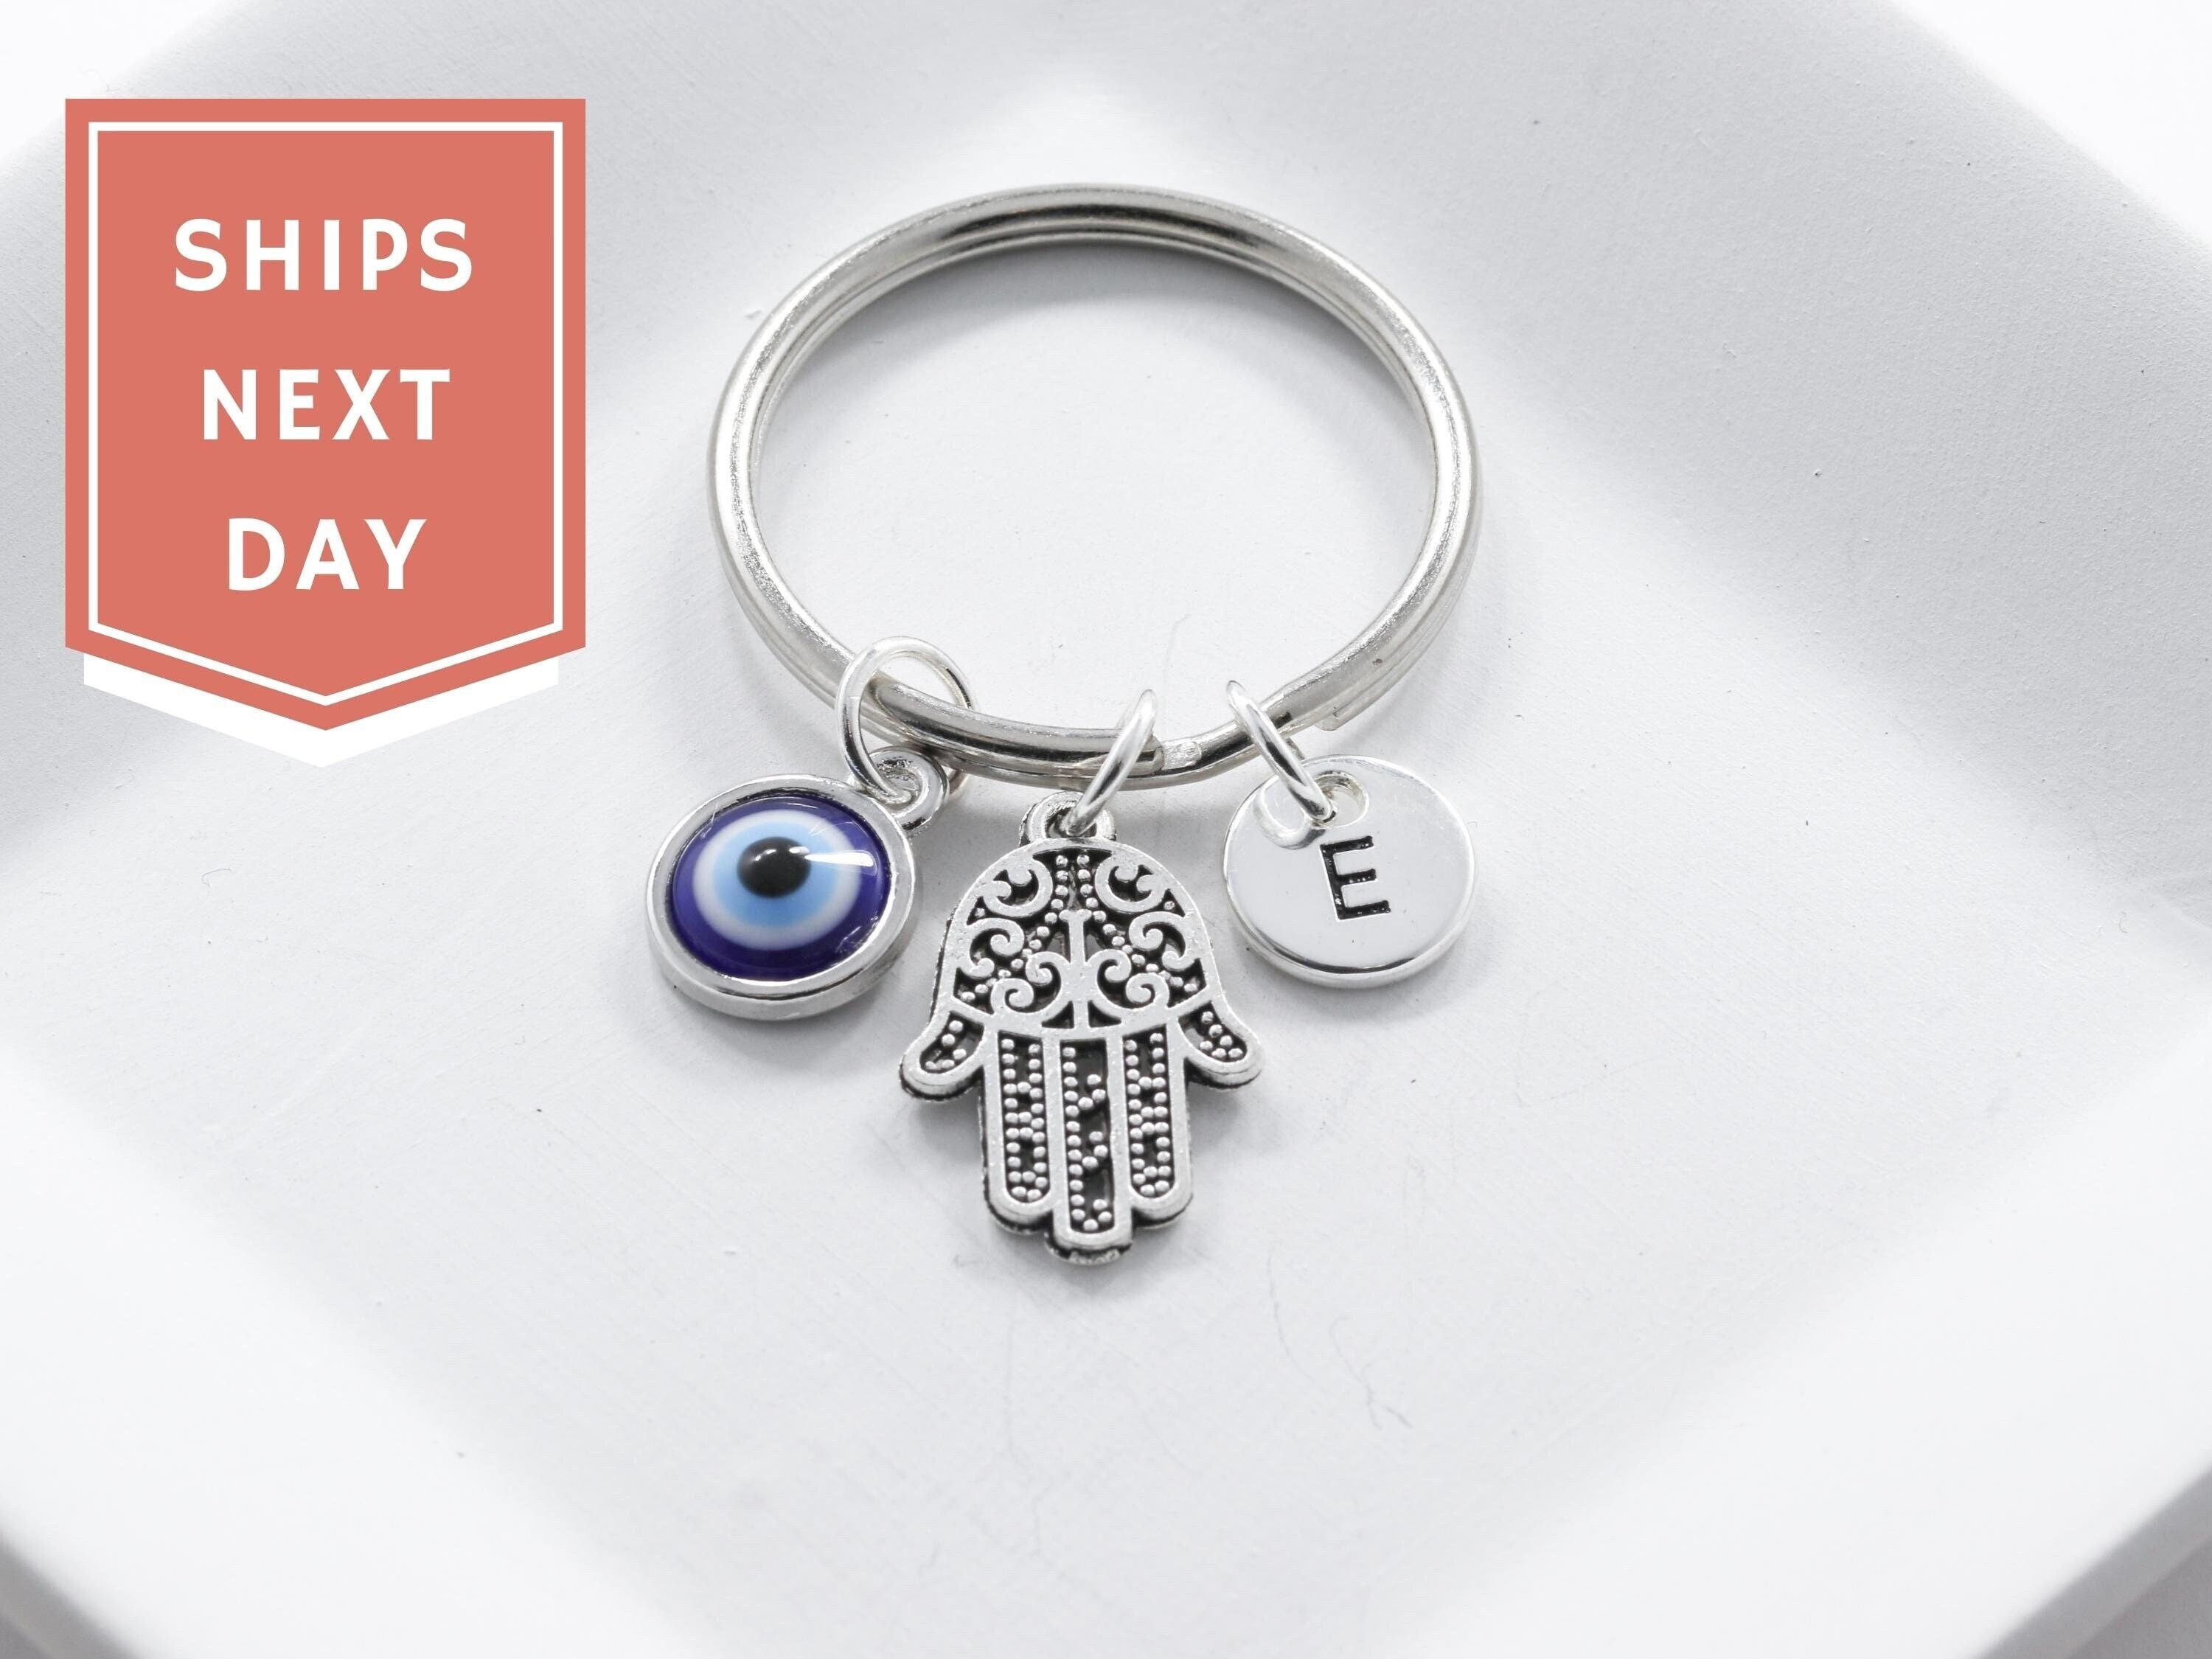 ARTISKRITI Evil Eye Keychain For Girls for Purse, Bike, Car, Mobile,  Gifting With Metal Key Ring Set of 2, Silver Angel and Peacock